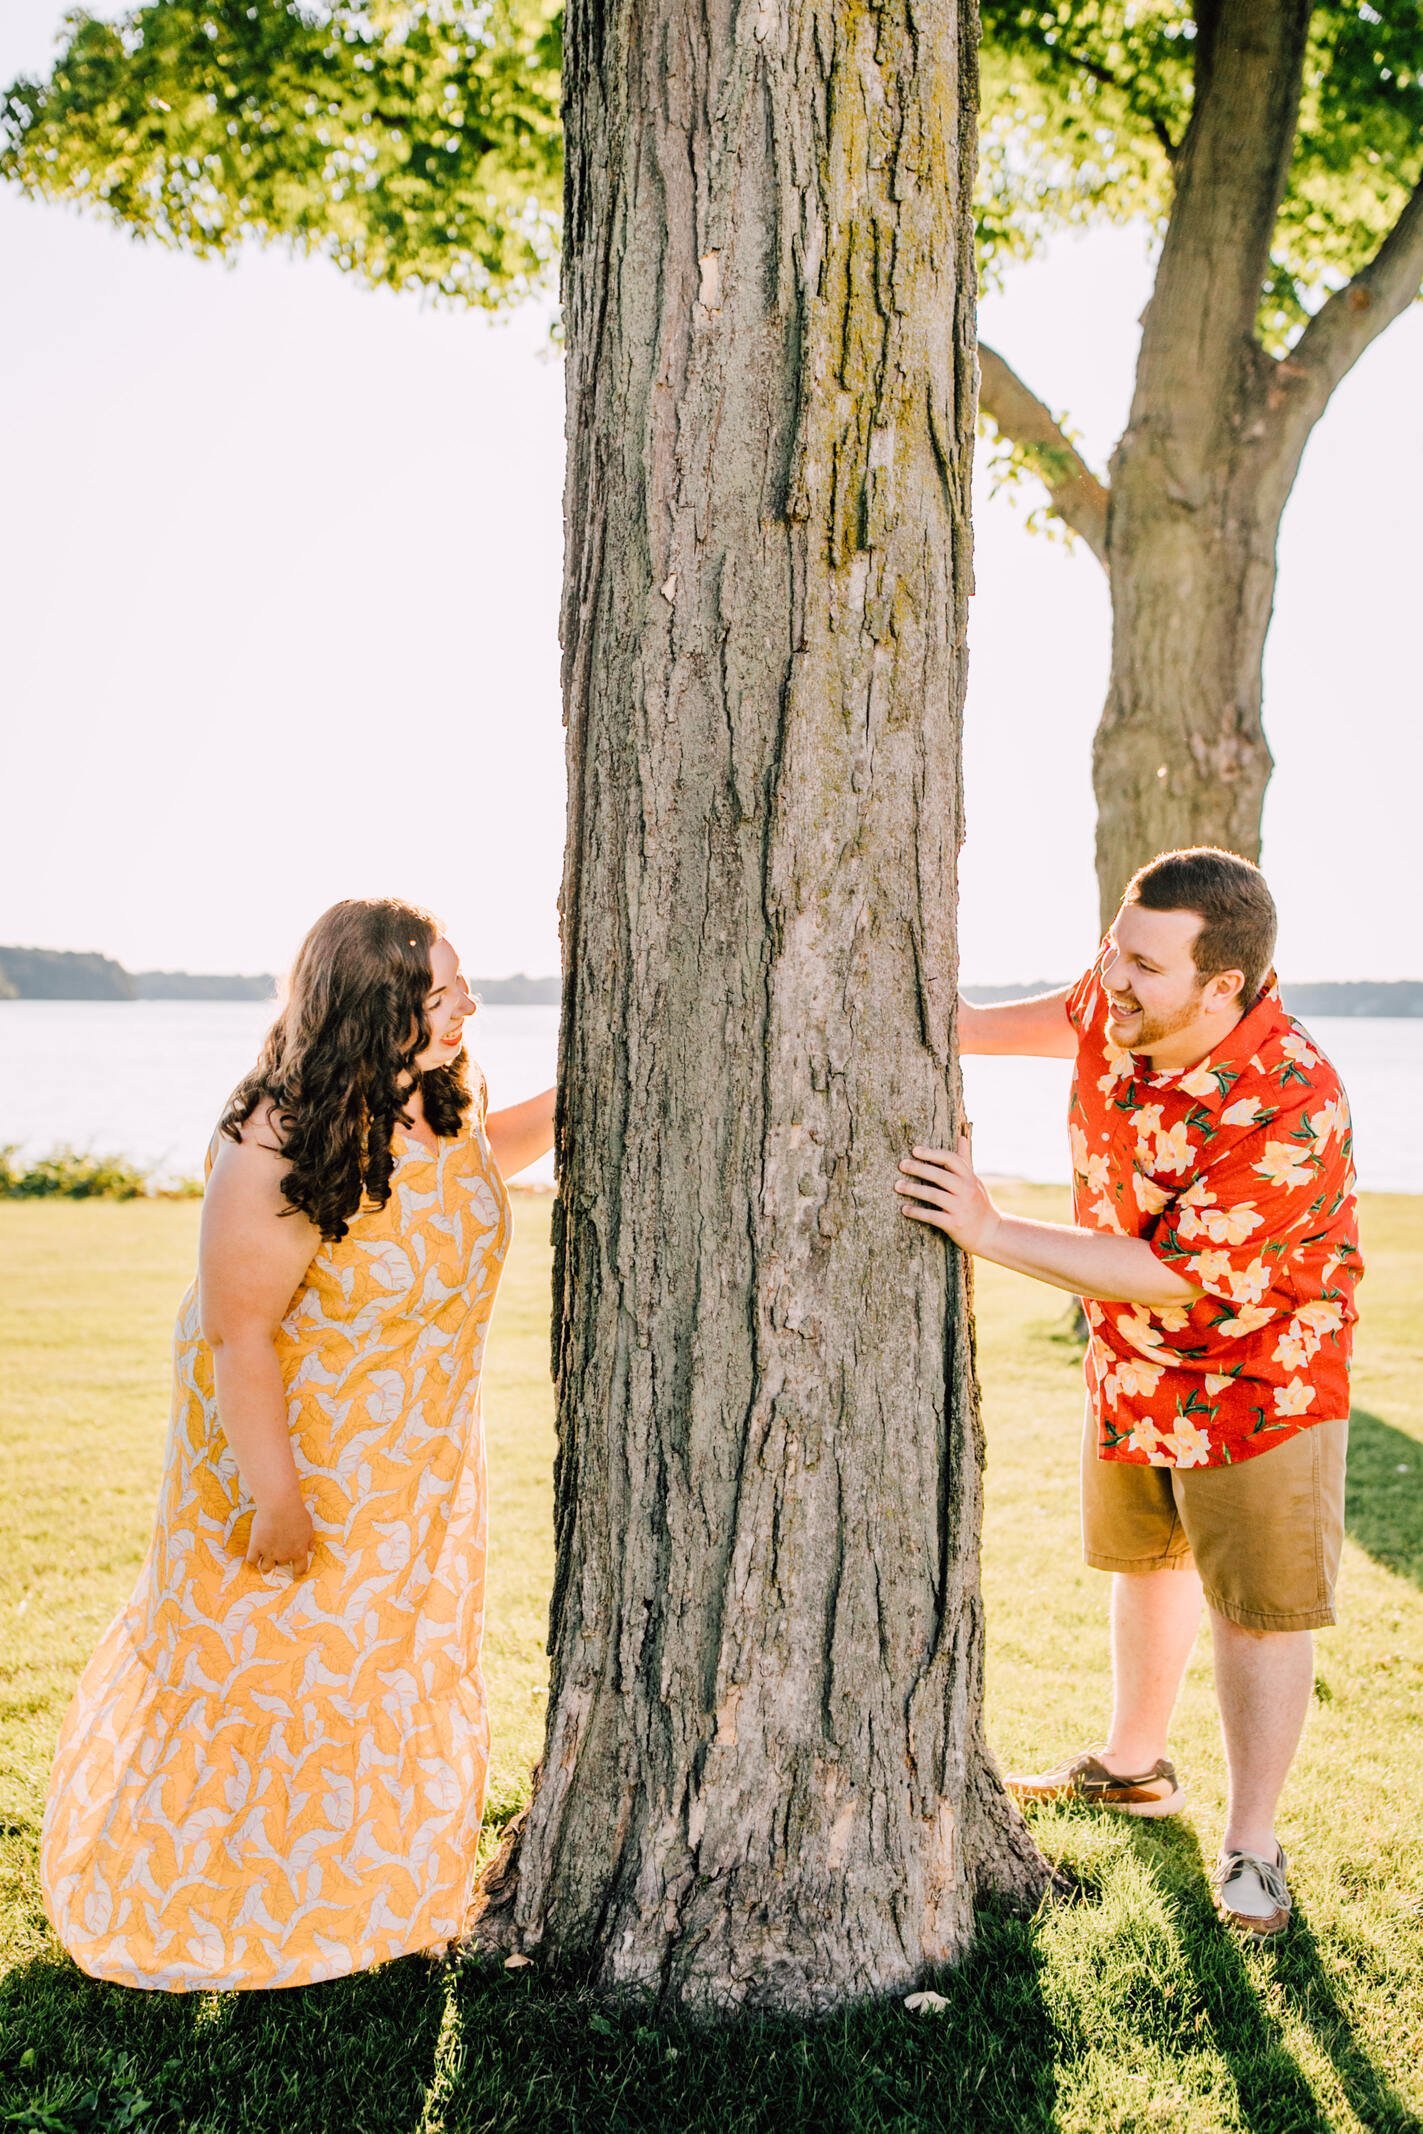  Hanna and Brandon smile at each other from opposite sides of a tree during sunset engagement photos in a grassy area with the lake at the horizon 